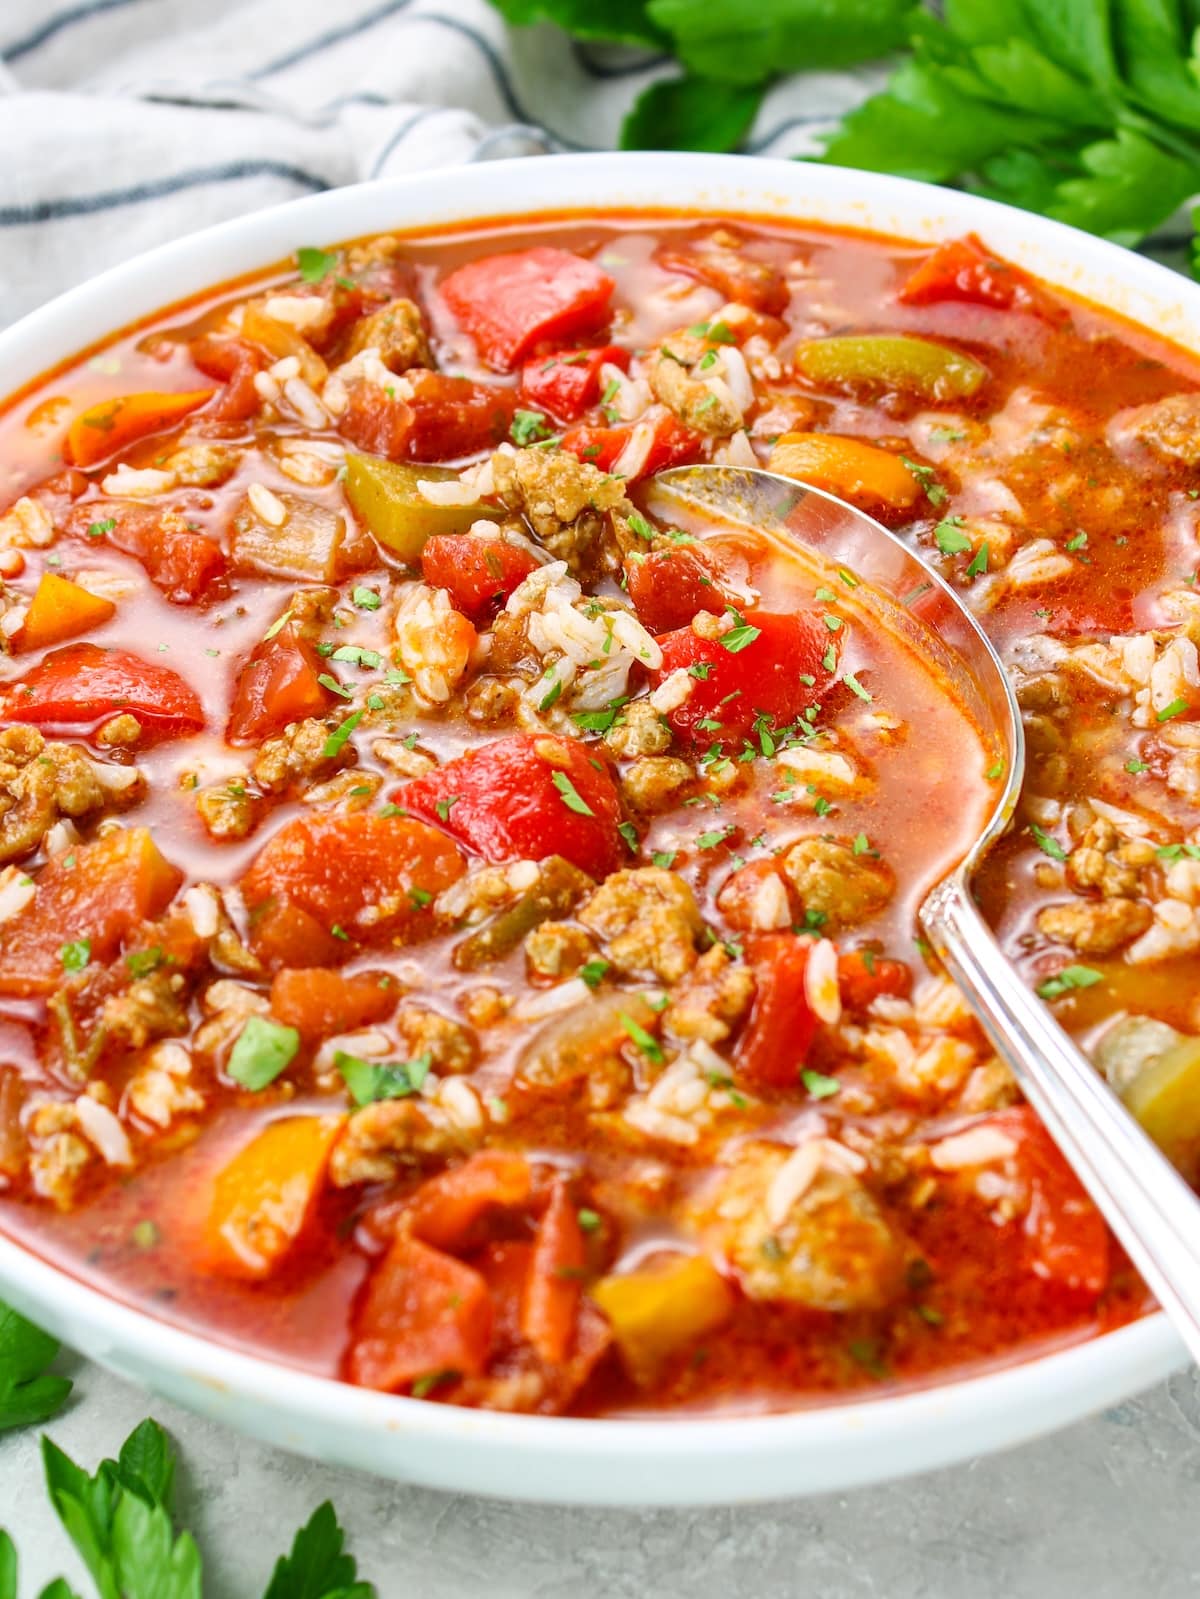 A close-up photo of a bowl of stuffed pepper soup.